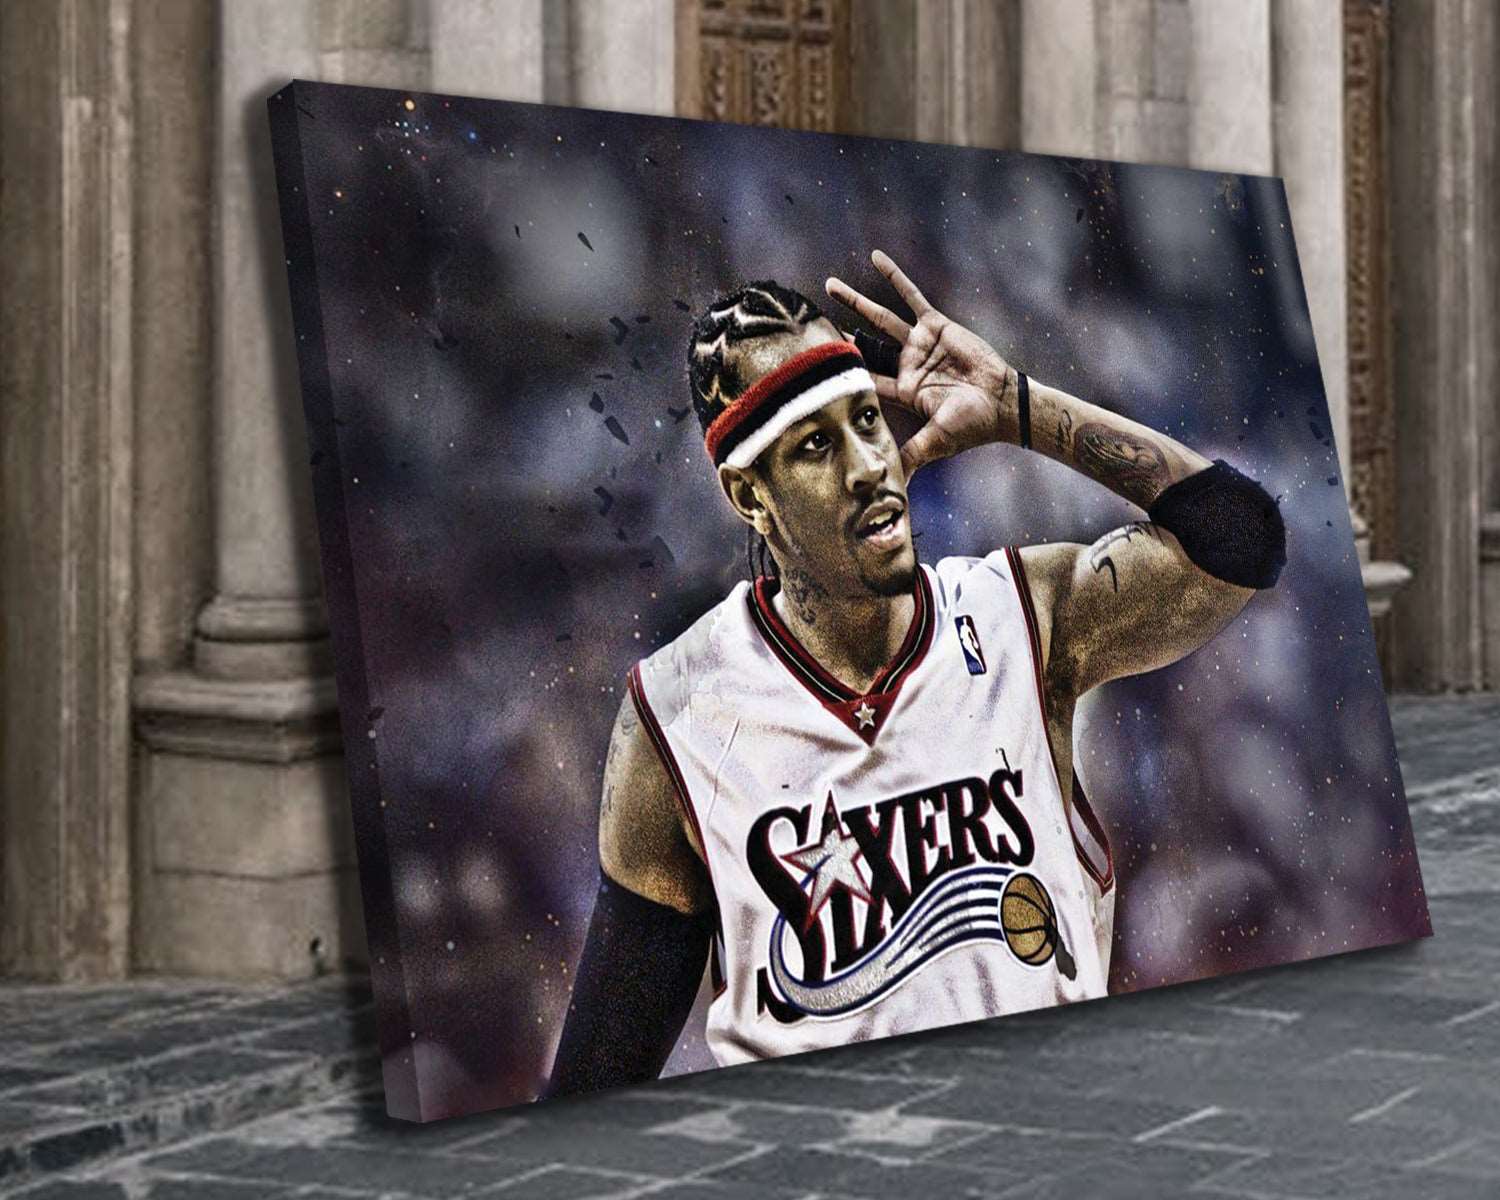 allen iverson jersey drawing